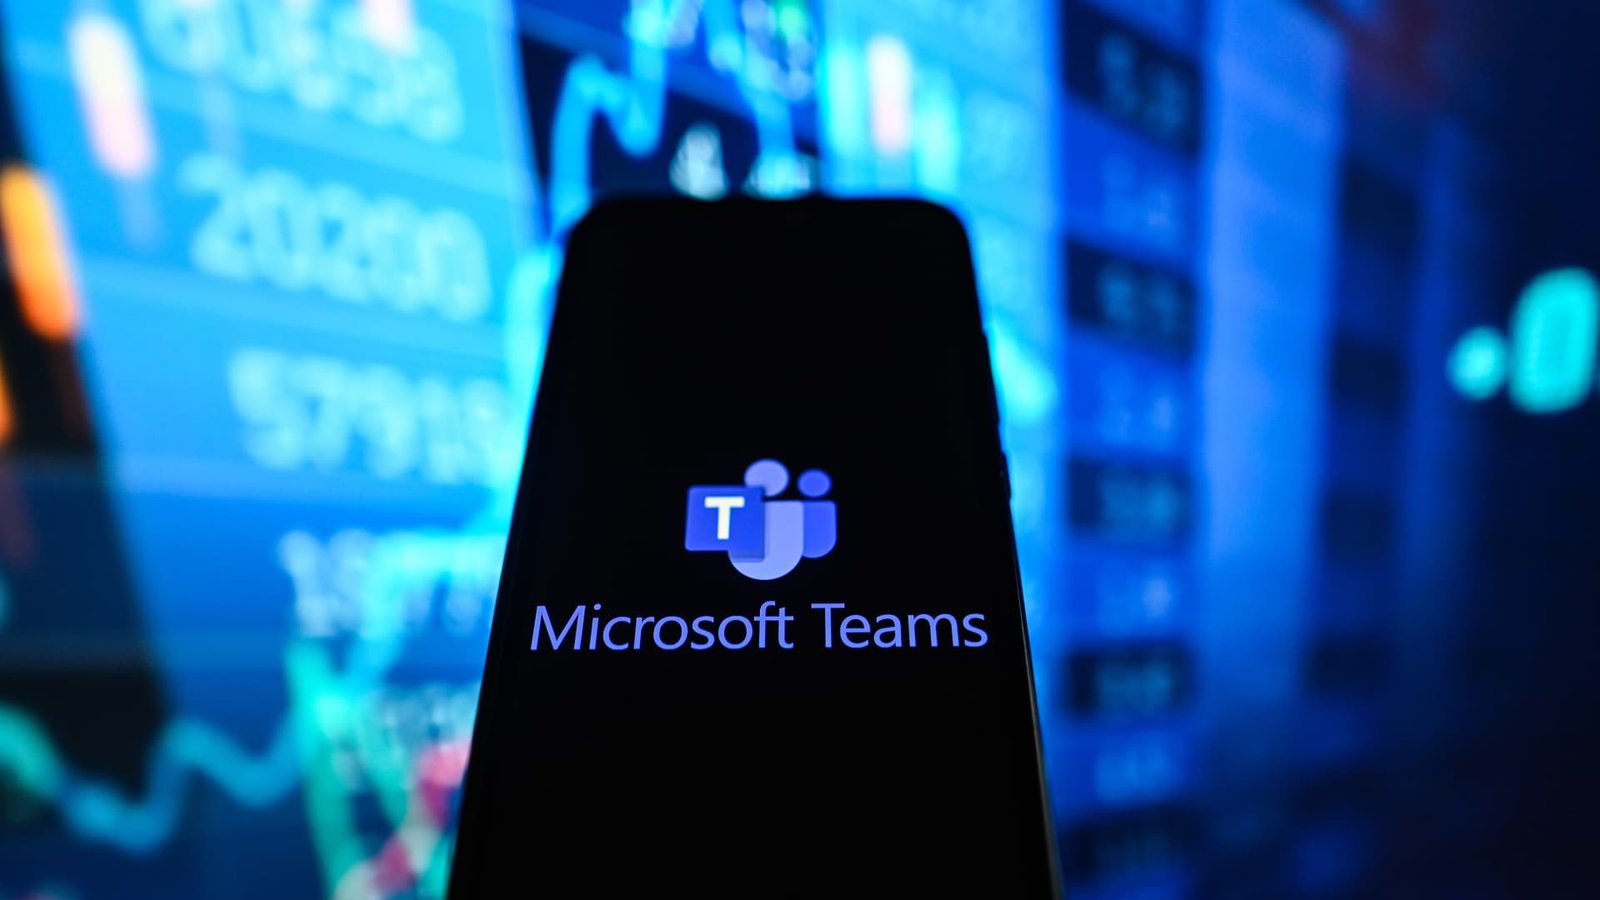 Microsoft's 'abusive' bundling of Teams, Office products breached antitrust rules, EU says